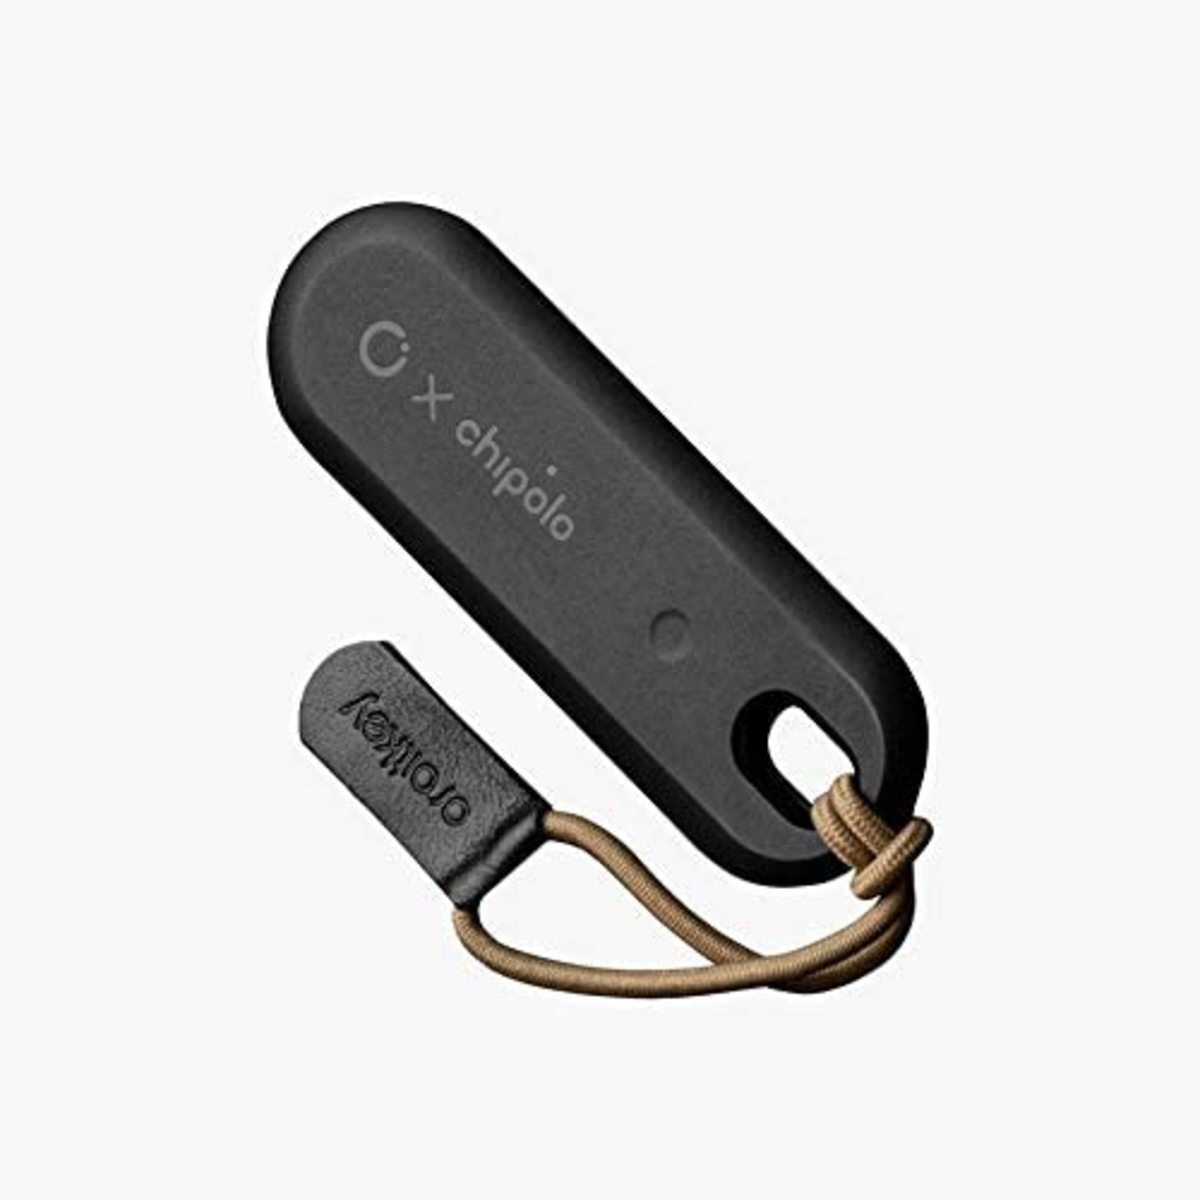 Never lose your keys again thanks to Orbitkey's CHIPOLO tracker.